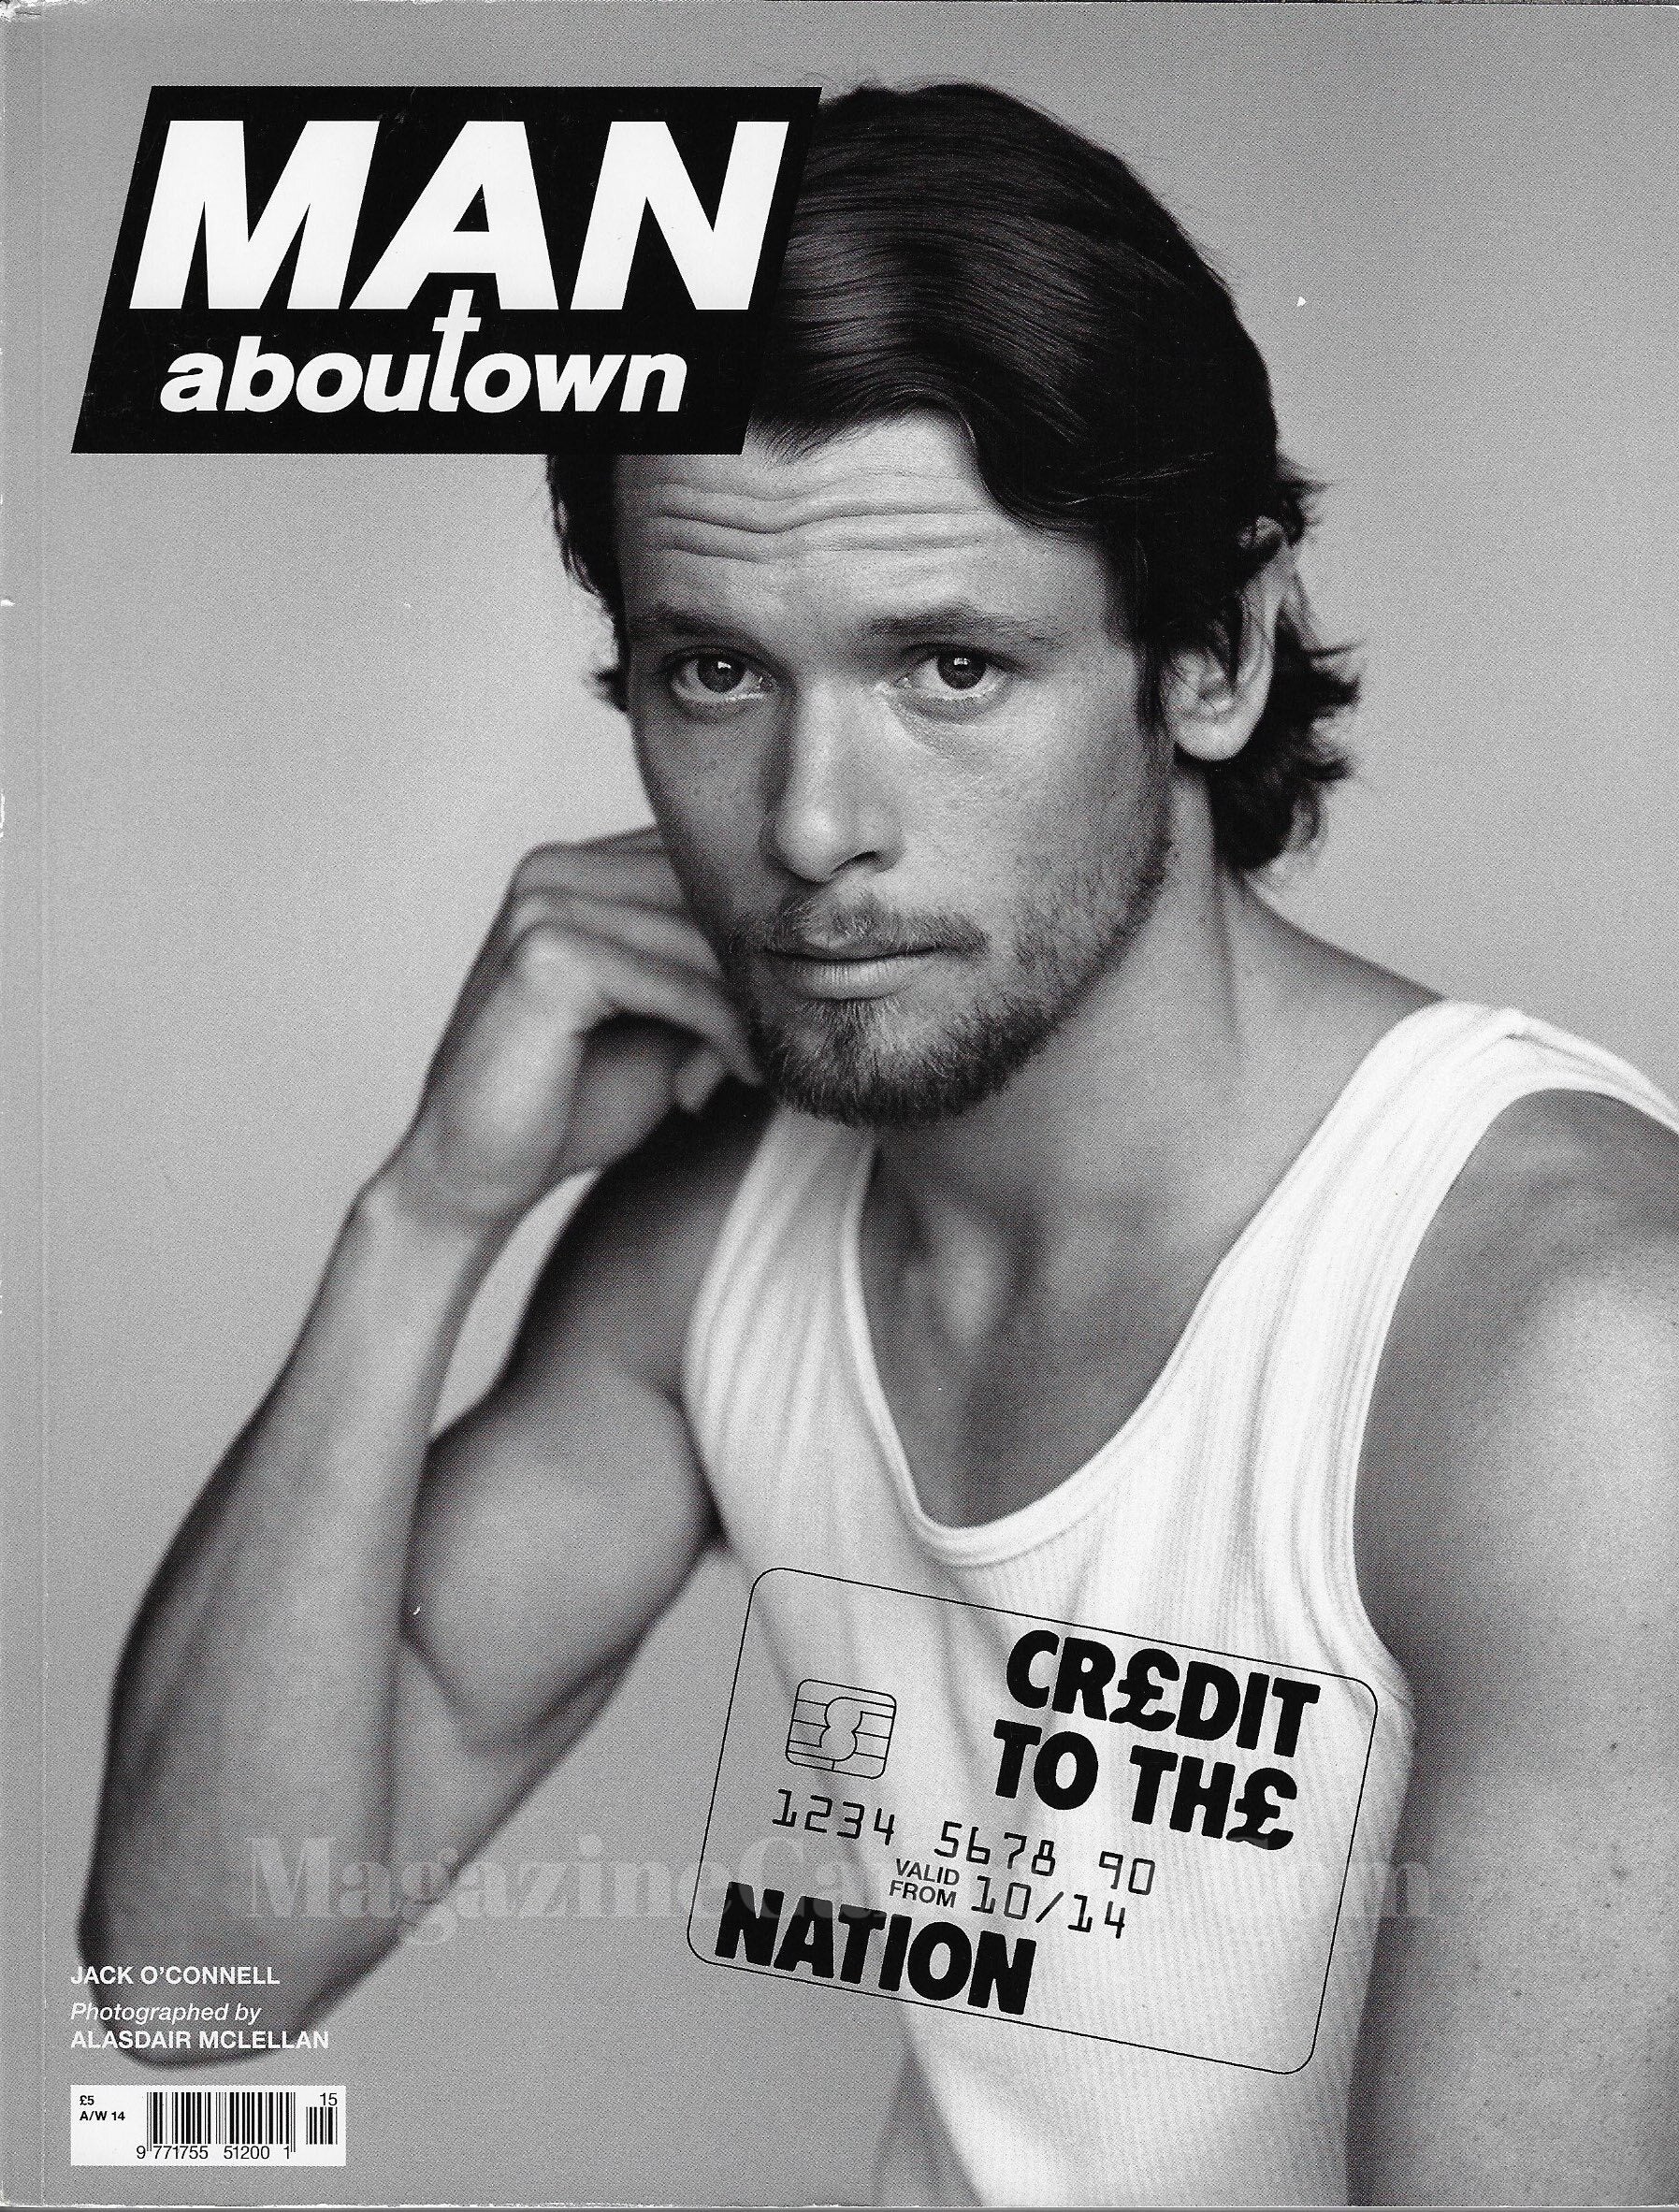 Man About Town Magazine - Jack O'Connell 2014